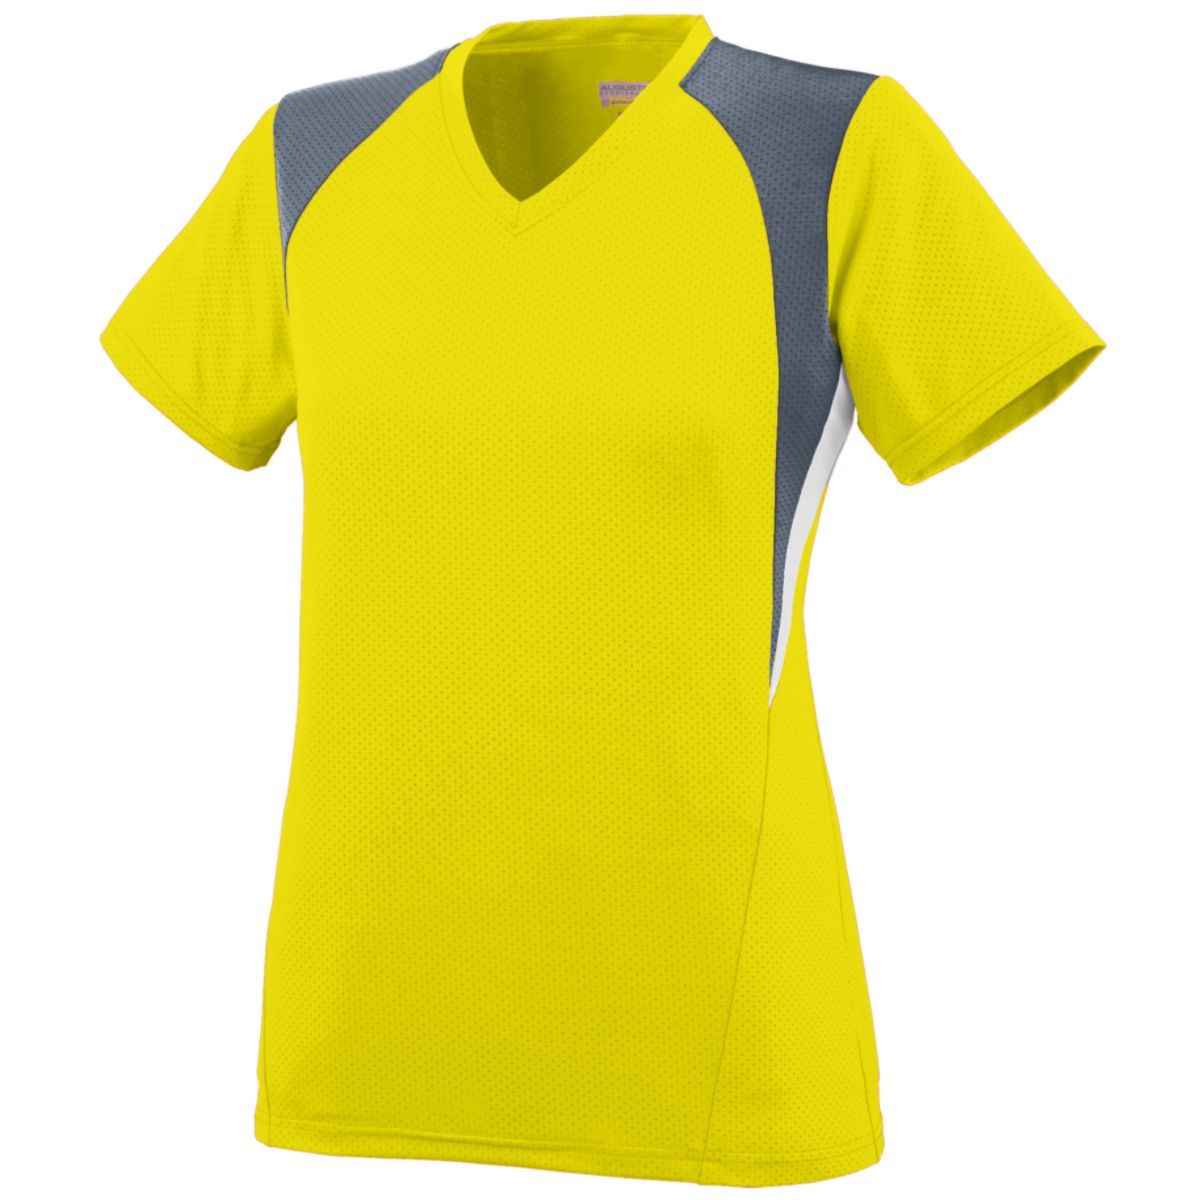 Augusta Sportswear Girls Mystic Jersey in Power Yellow/Graphite/White  -Part of the Girls, Augusta-Products, Soccer, Girls-Jersey, Shirts, All-Sports-1 product lines at KanaleyCreations.com